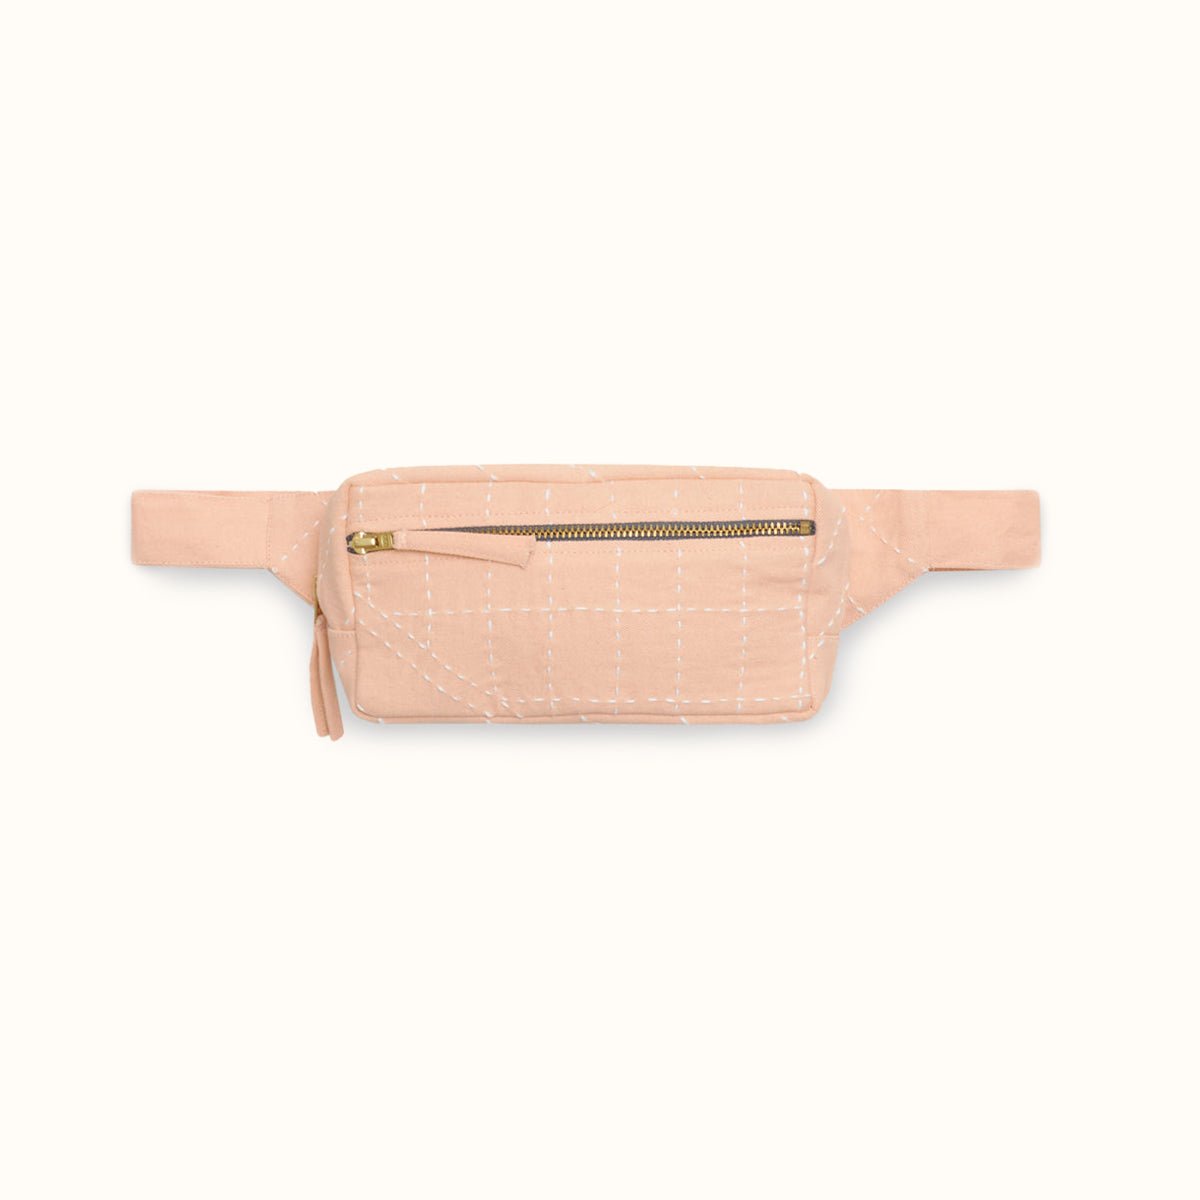 An light pink crossbody bag with white stitched detail. The Crossbody Belt Bag in Pink is designed by Anchal in Louisville, KY and handmade in Ajmer, India